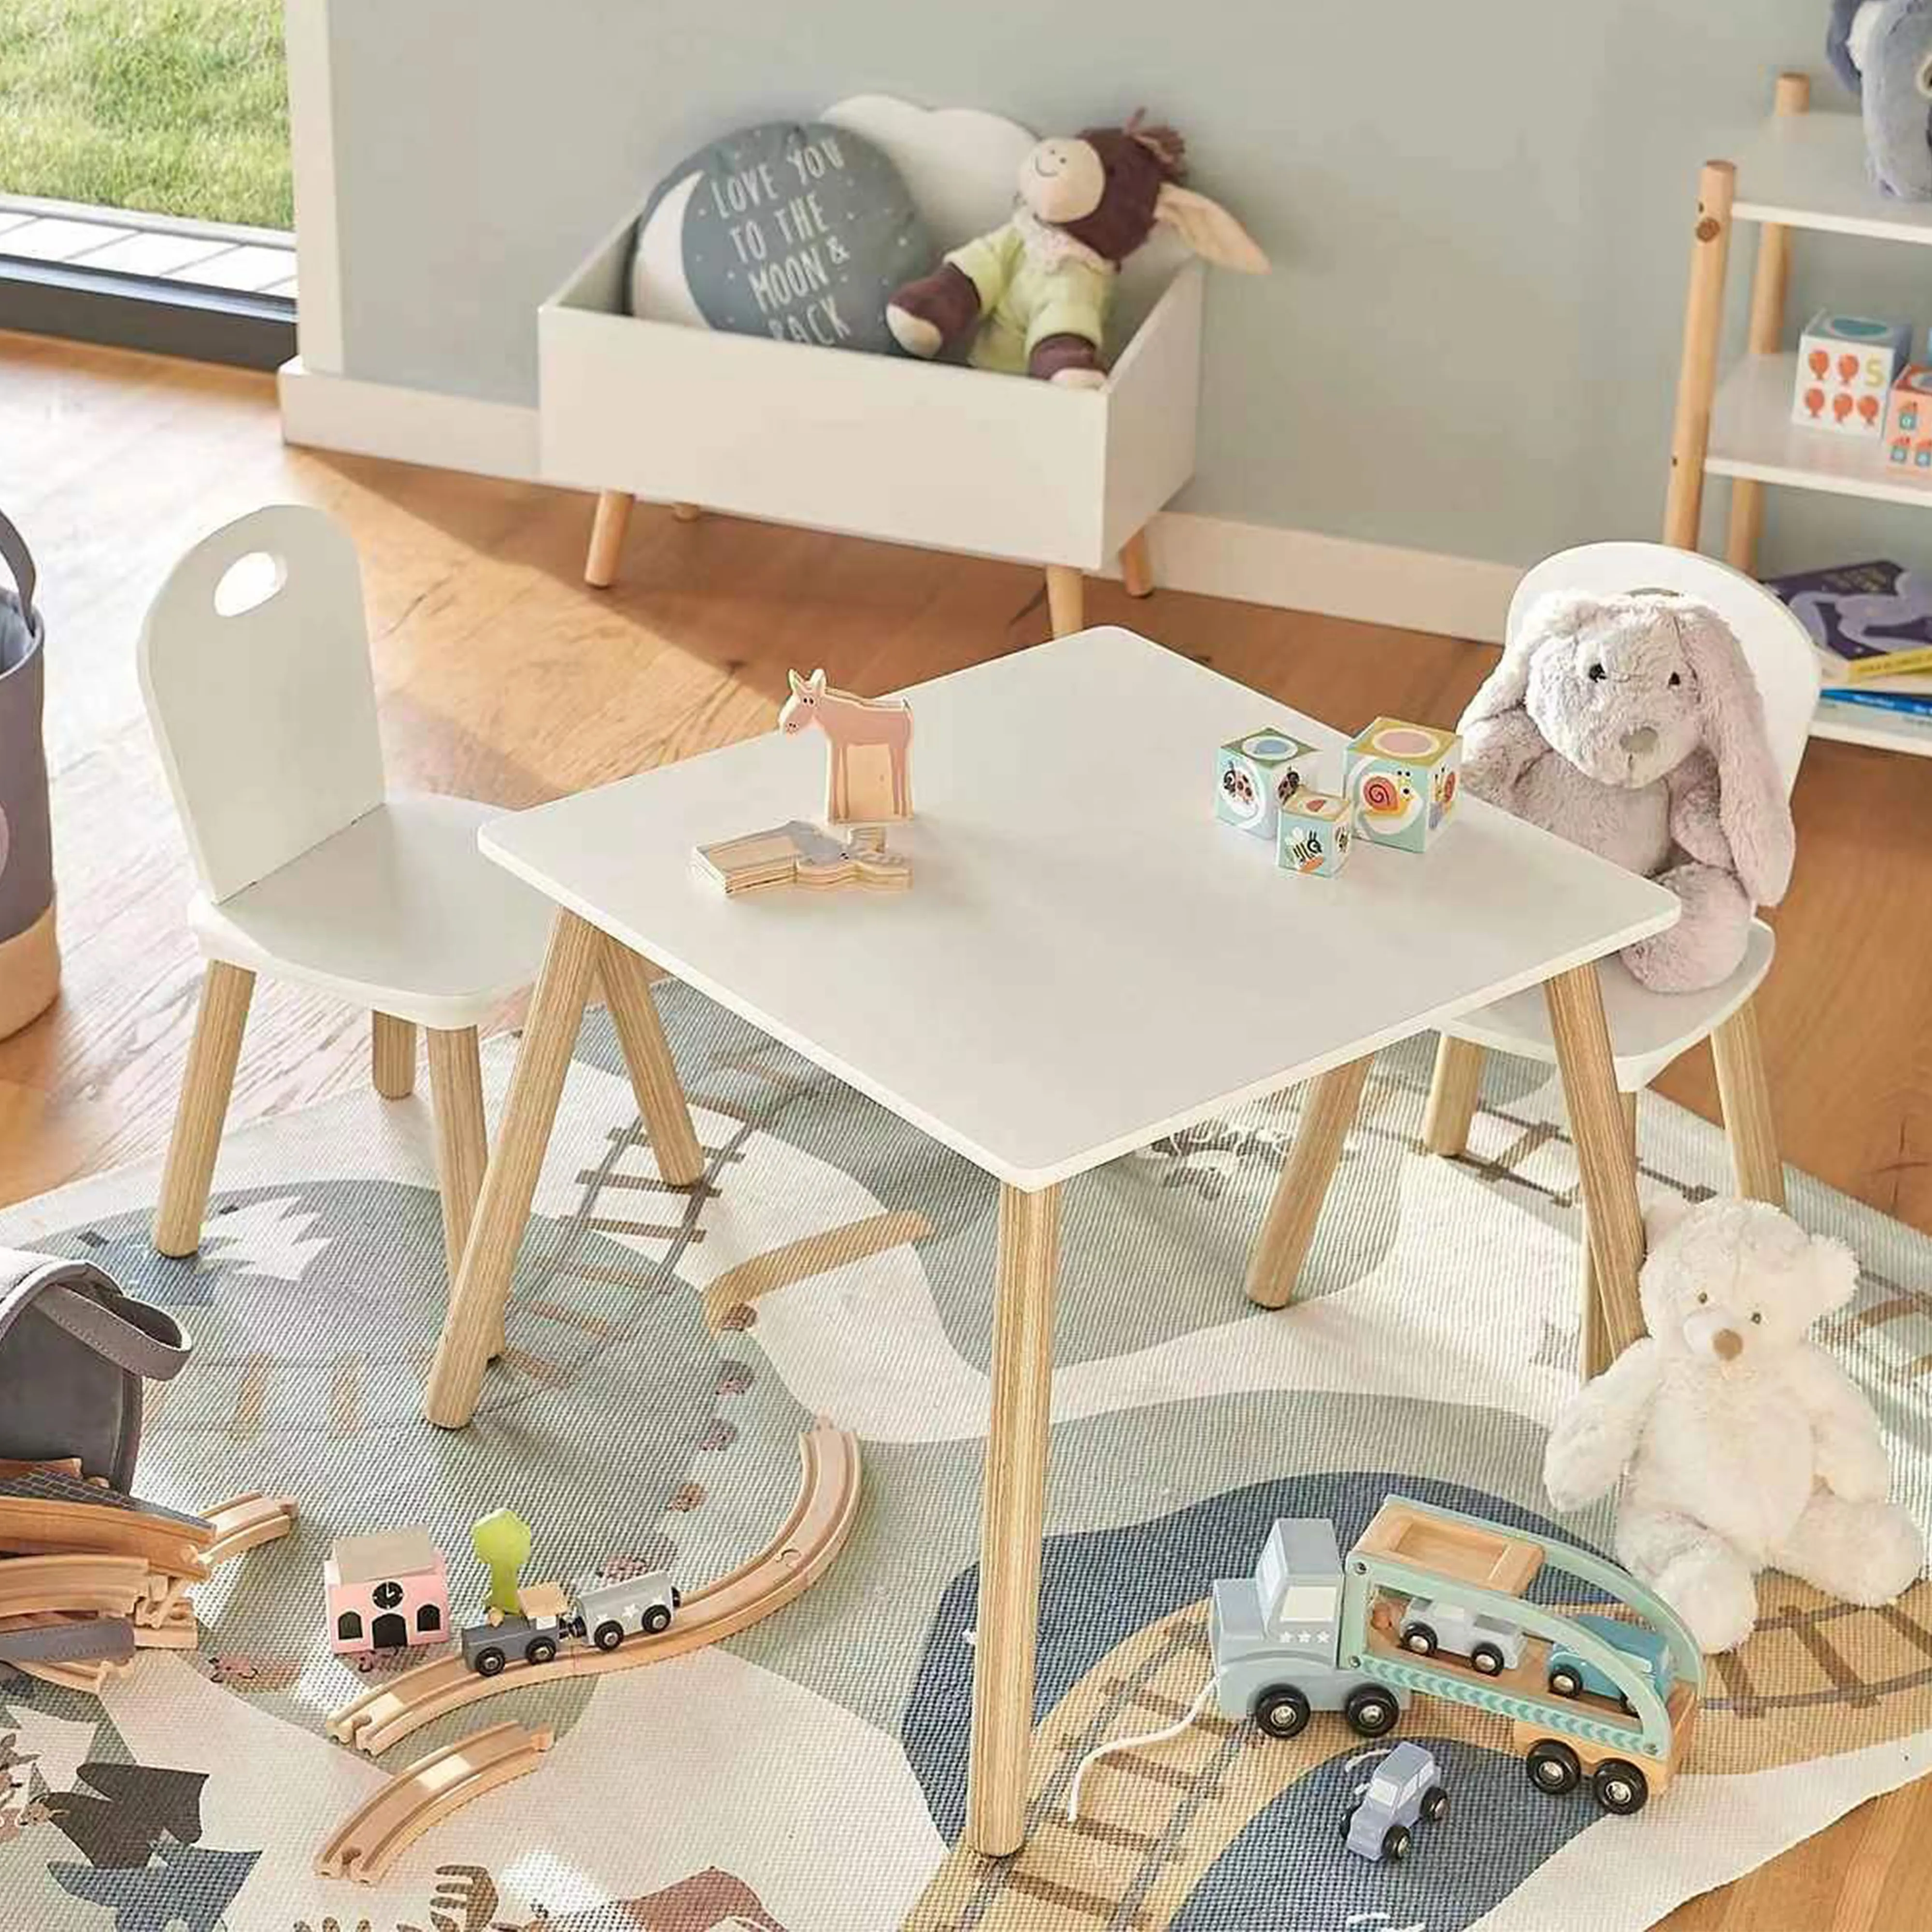 Kids Wooden Table and Chairs Set Baby Furniture Children Play Games Desk for Playroom Kids Wooden Small Round Table